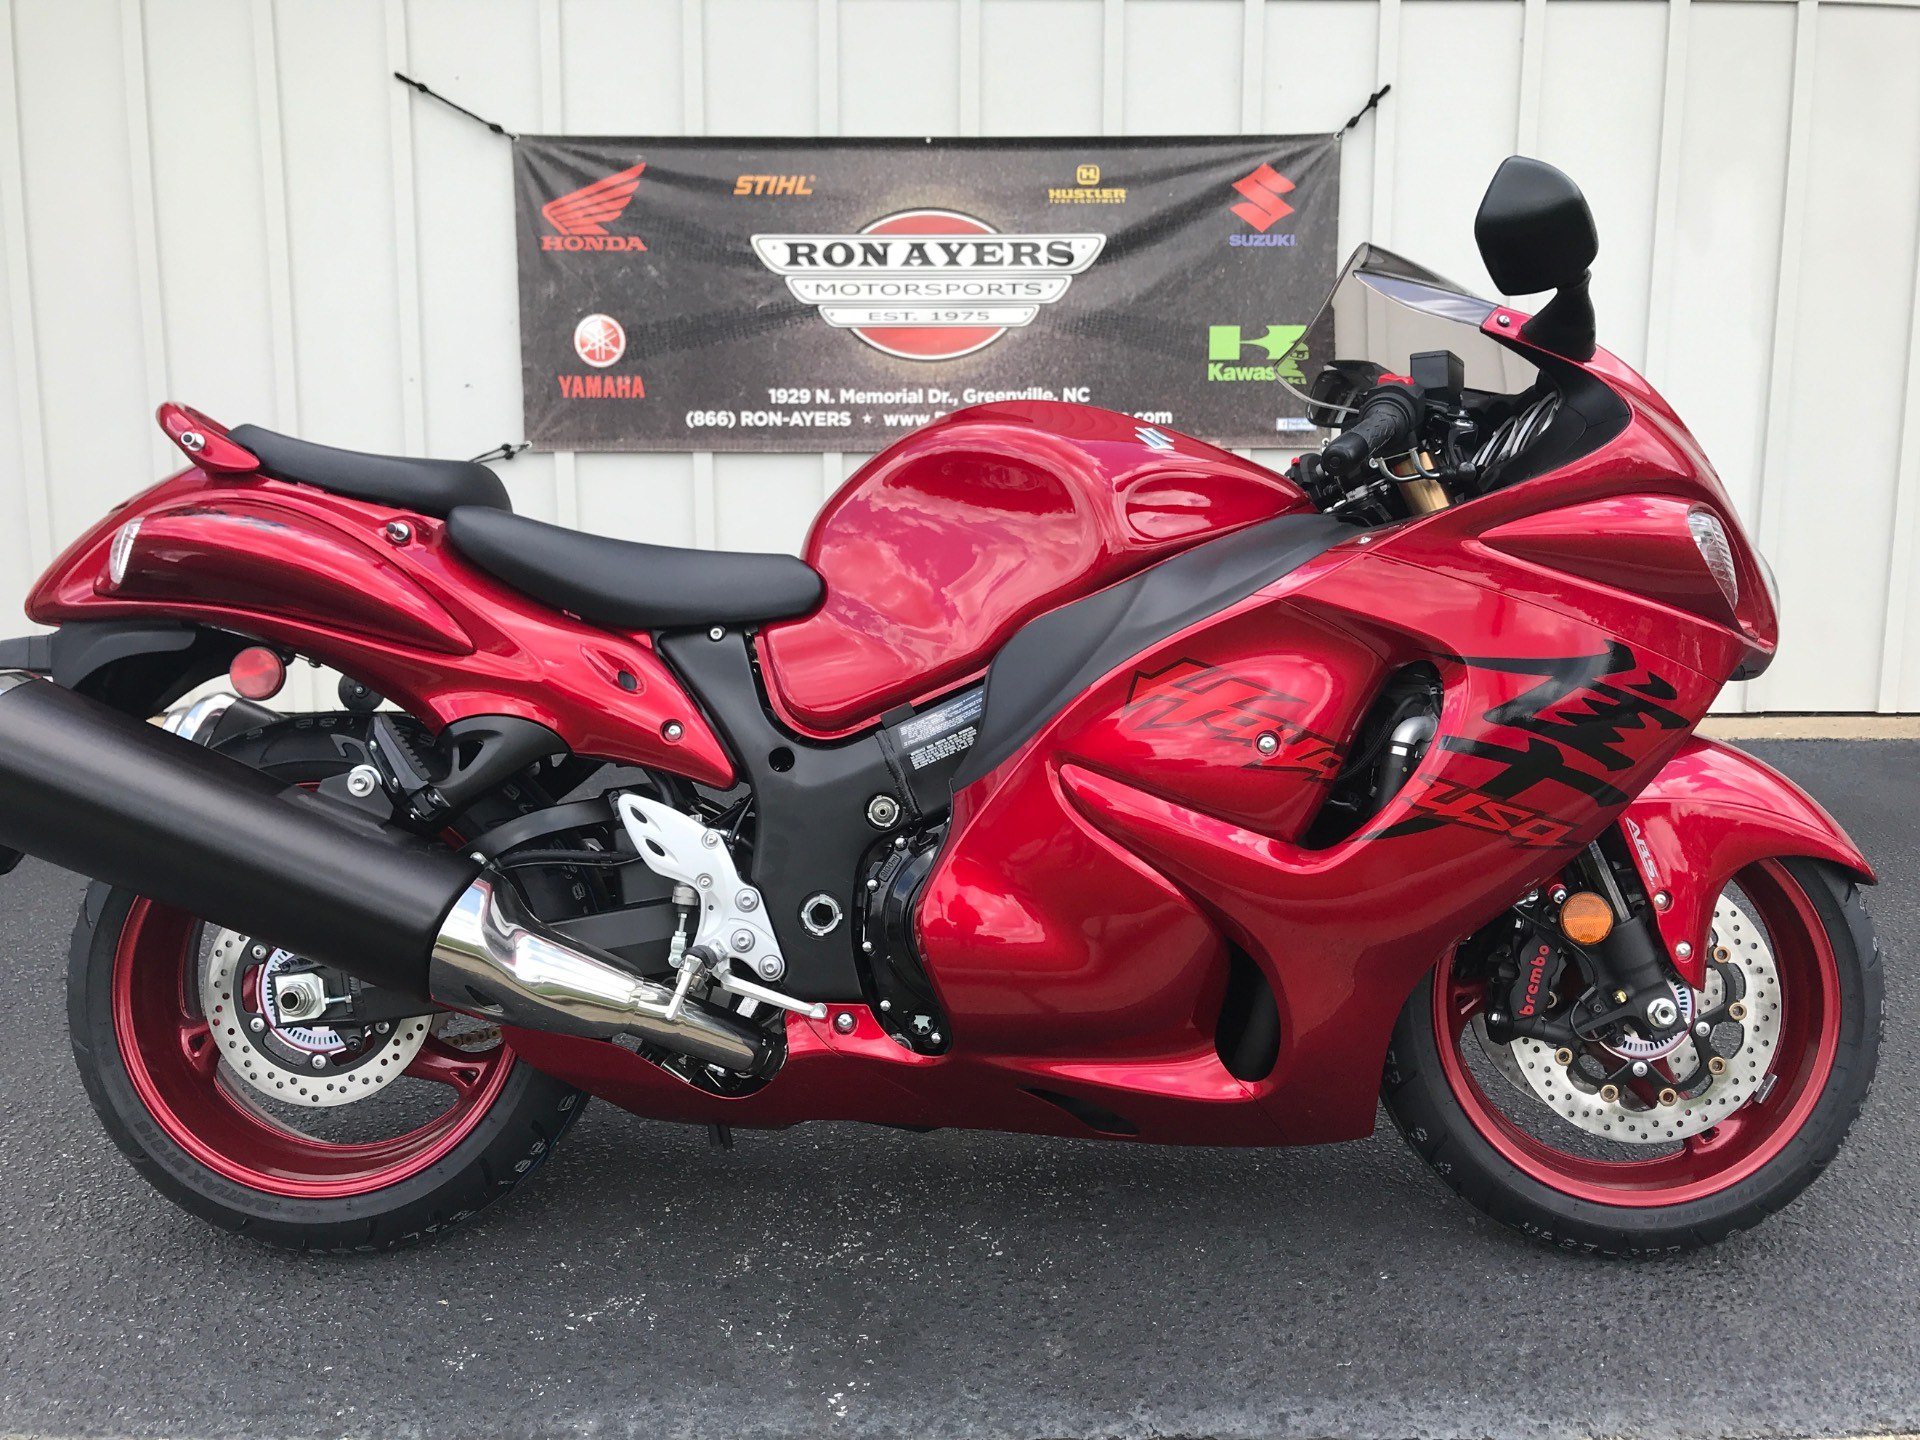 New 2020 Suzuki Hayabusa Motorcycles in Greenville, NC | Stock Number: N/A